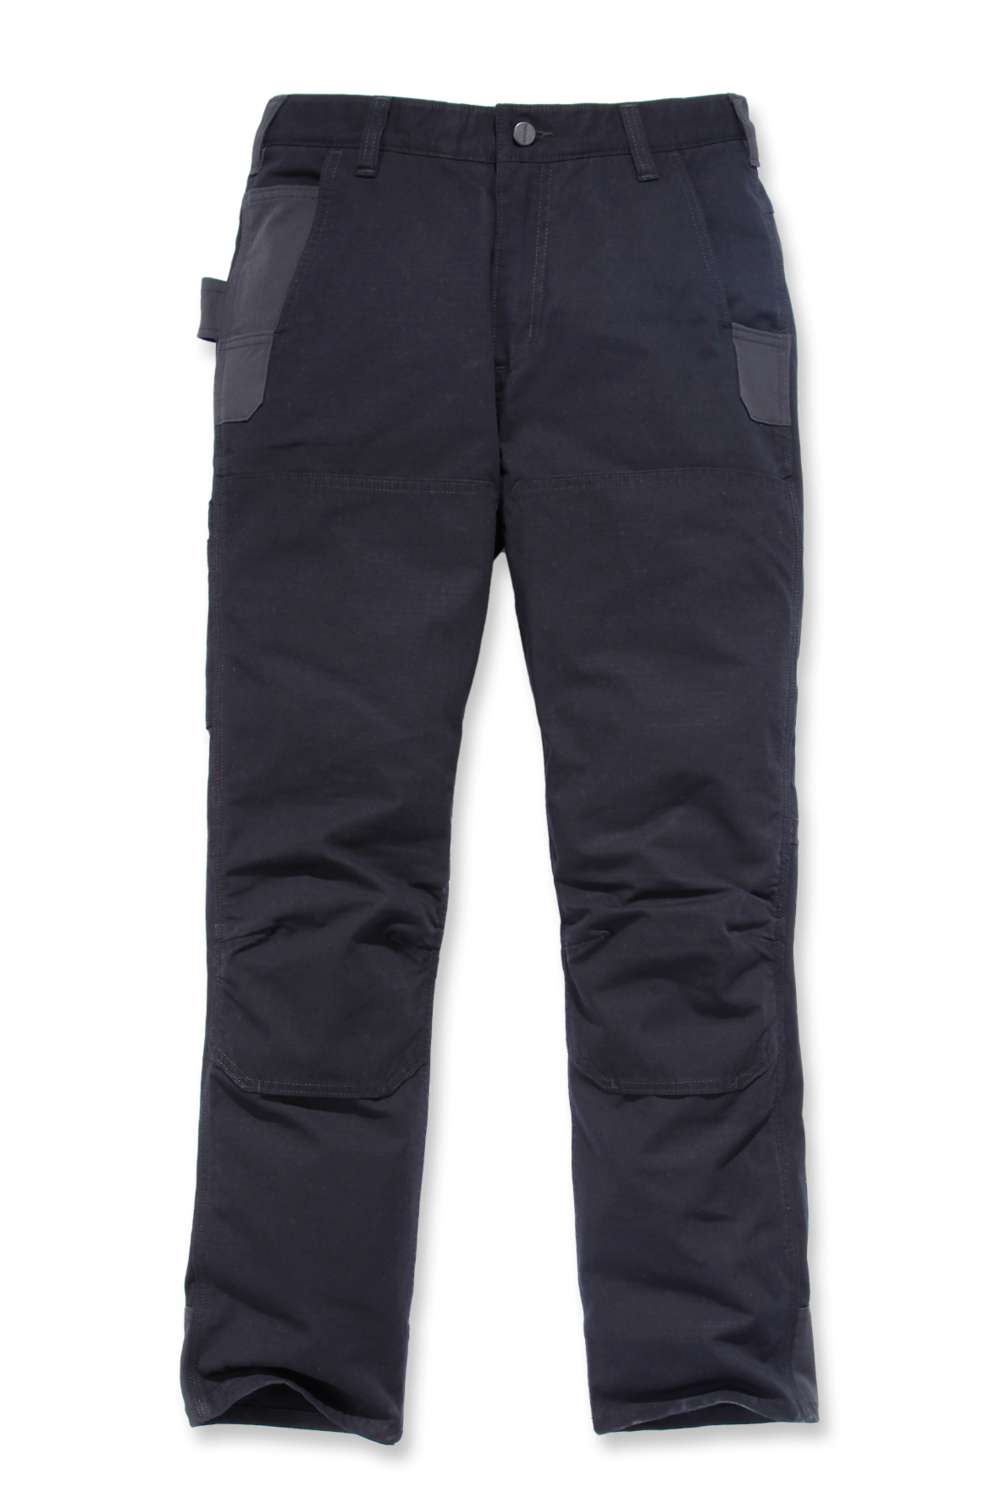 STEEL_DOUBLE_FRONT_PANT_8X5aWTmiaY